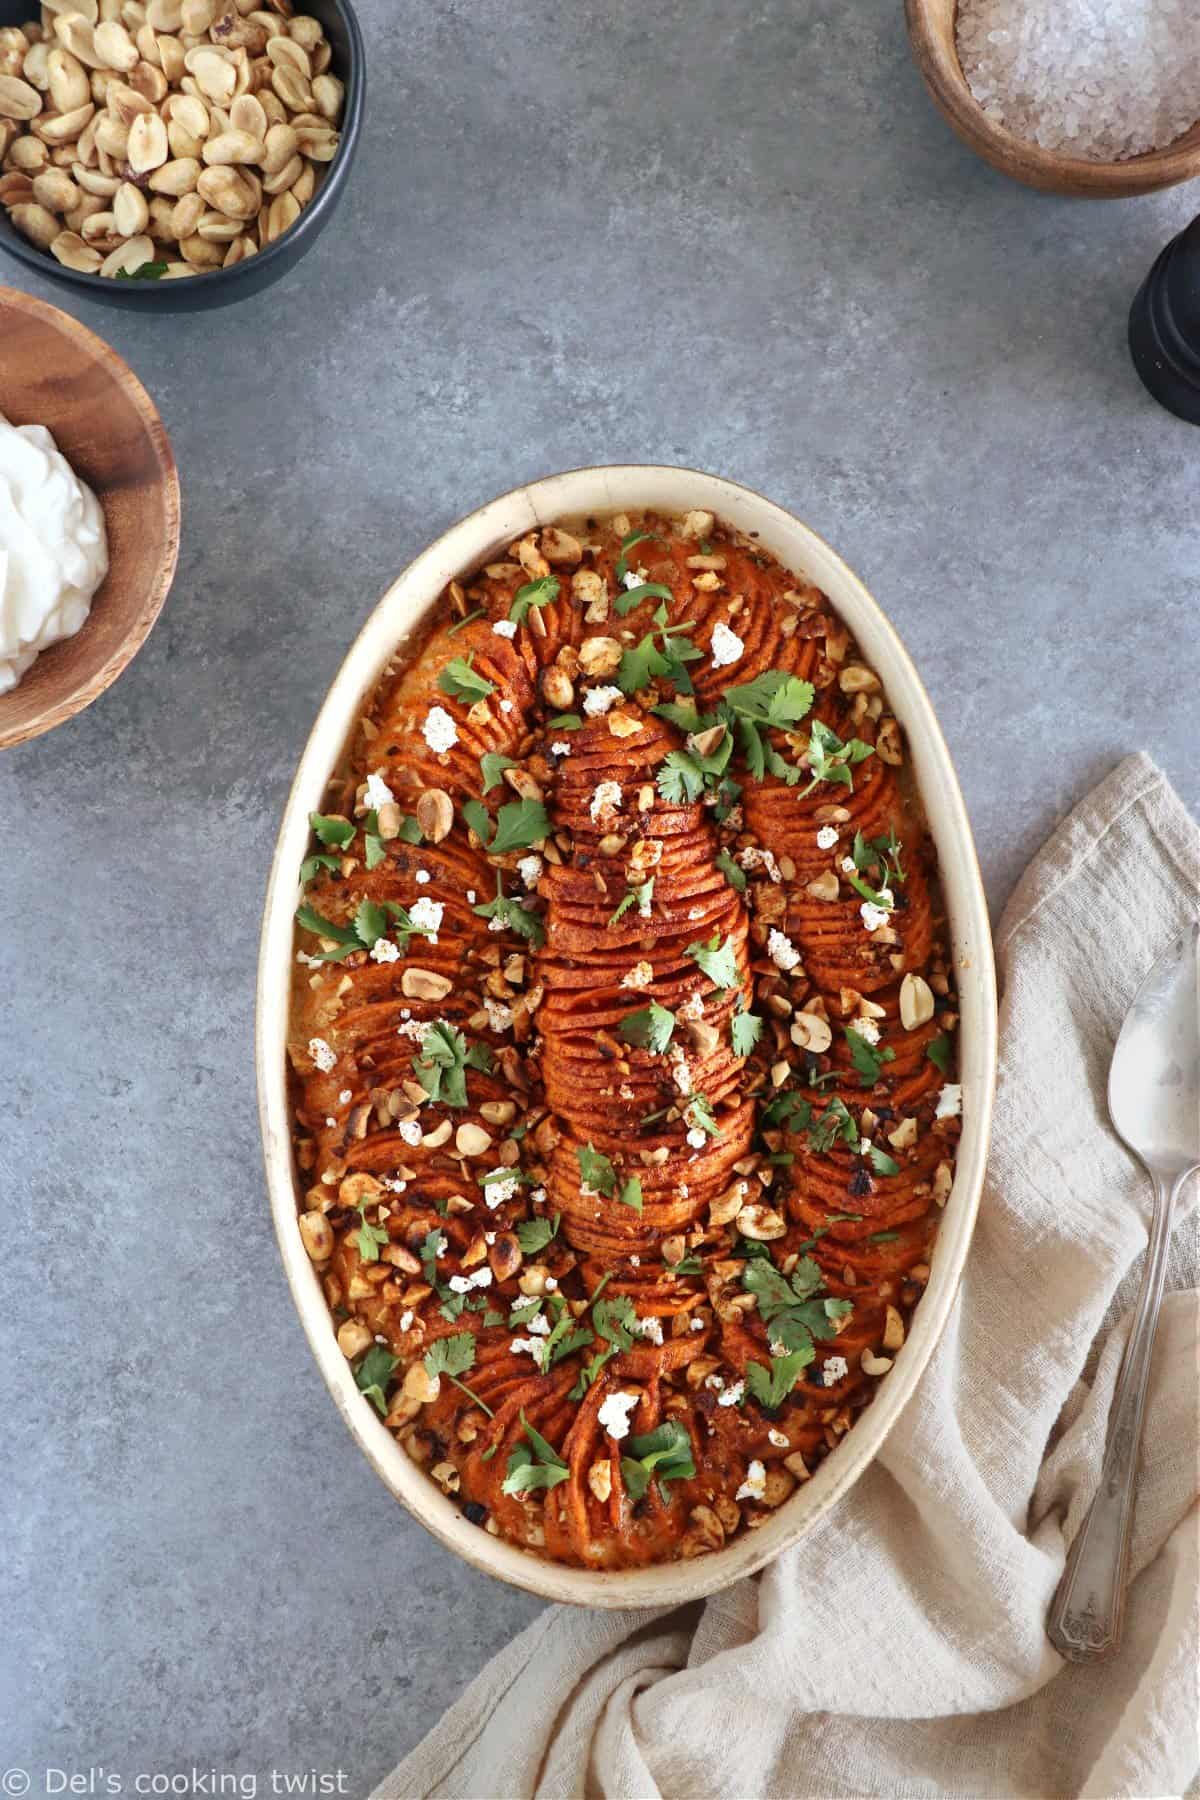 Spicy Sweet Potato and Peanut Butter Gratin